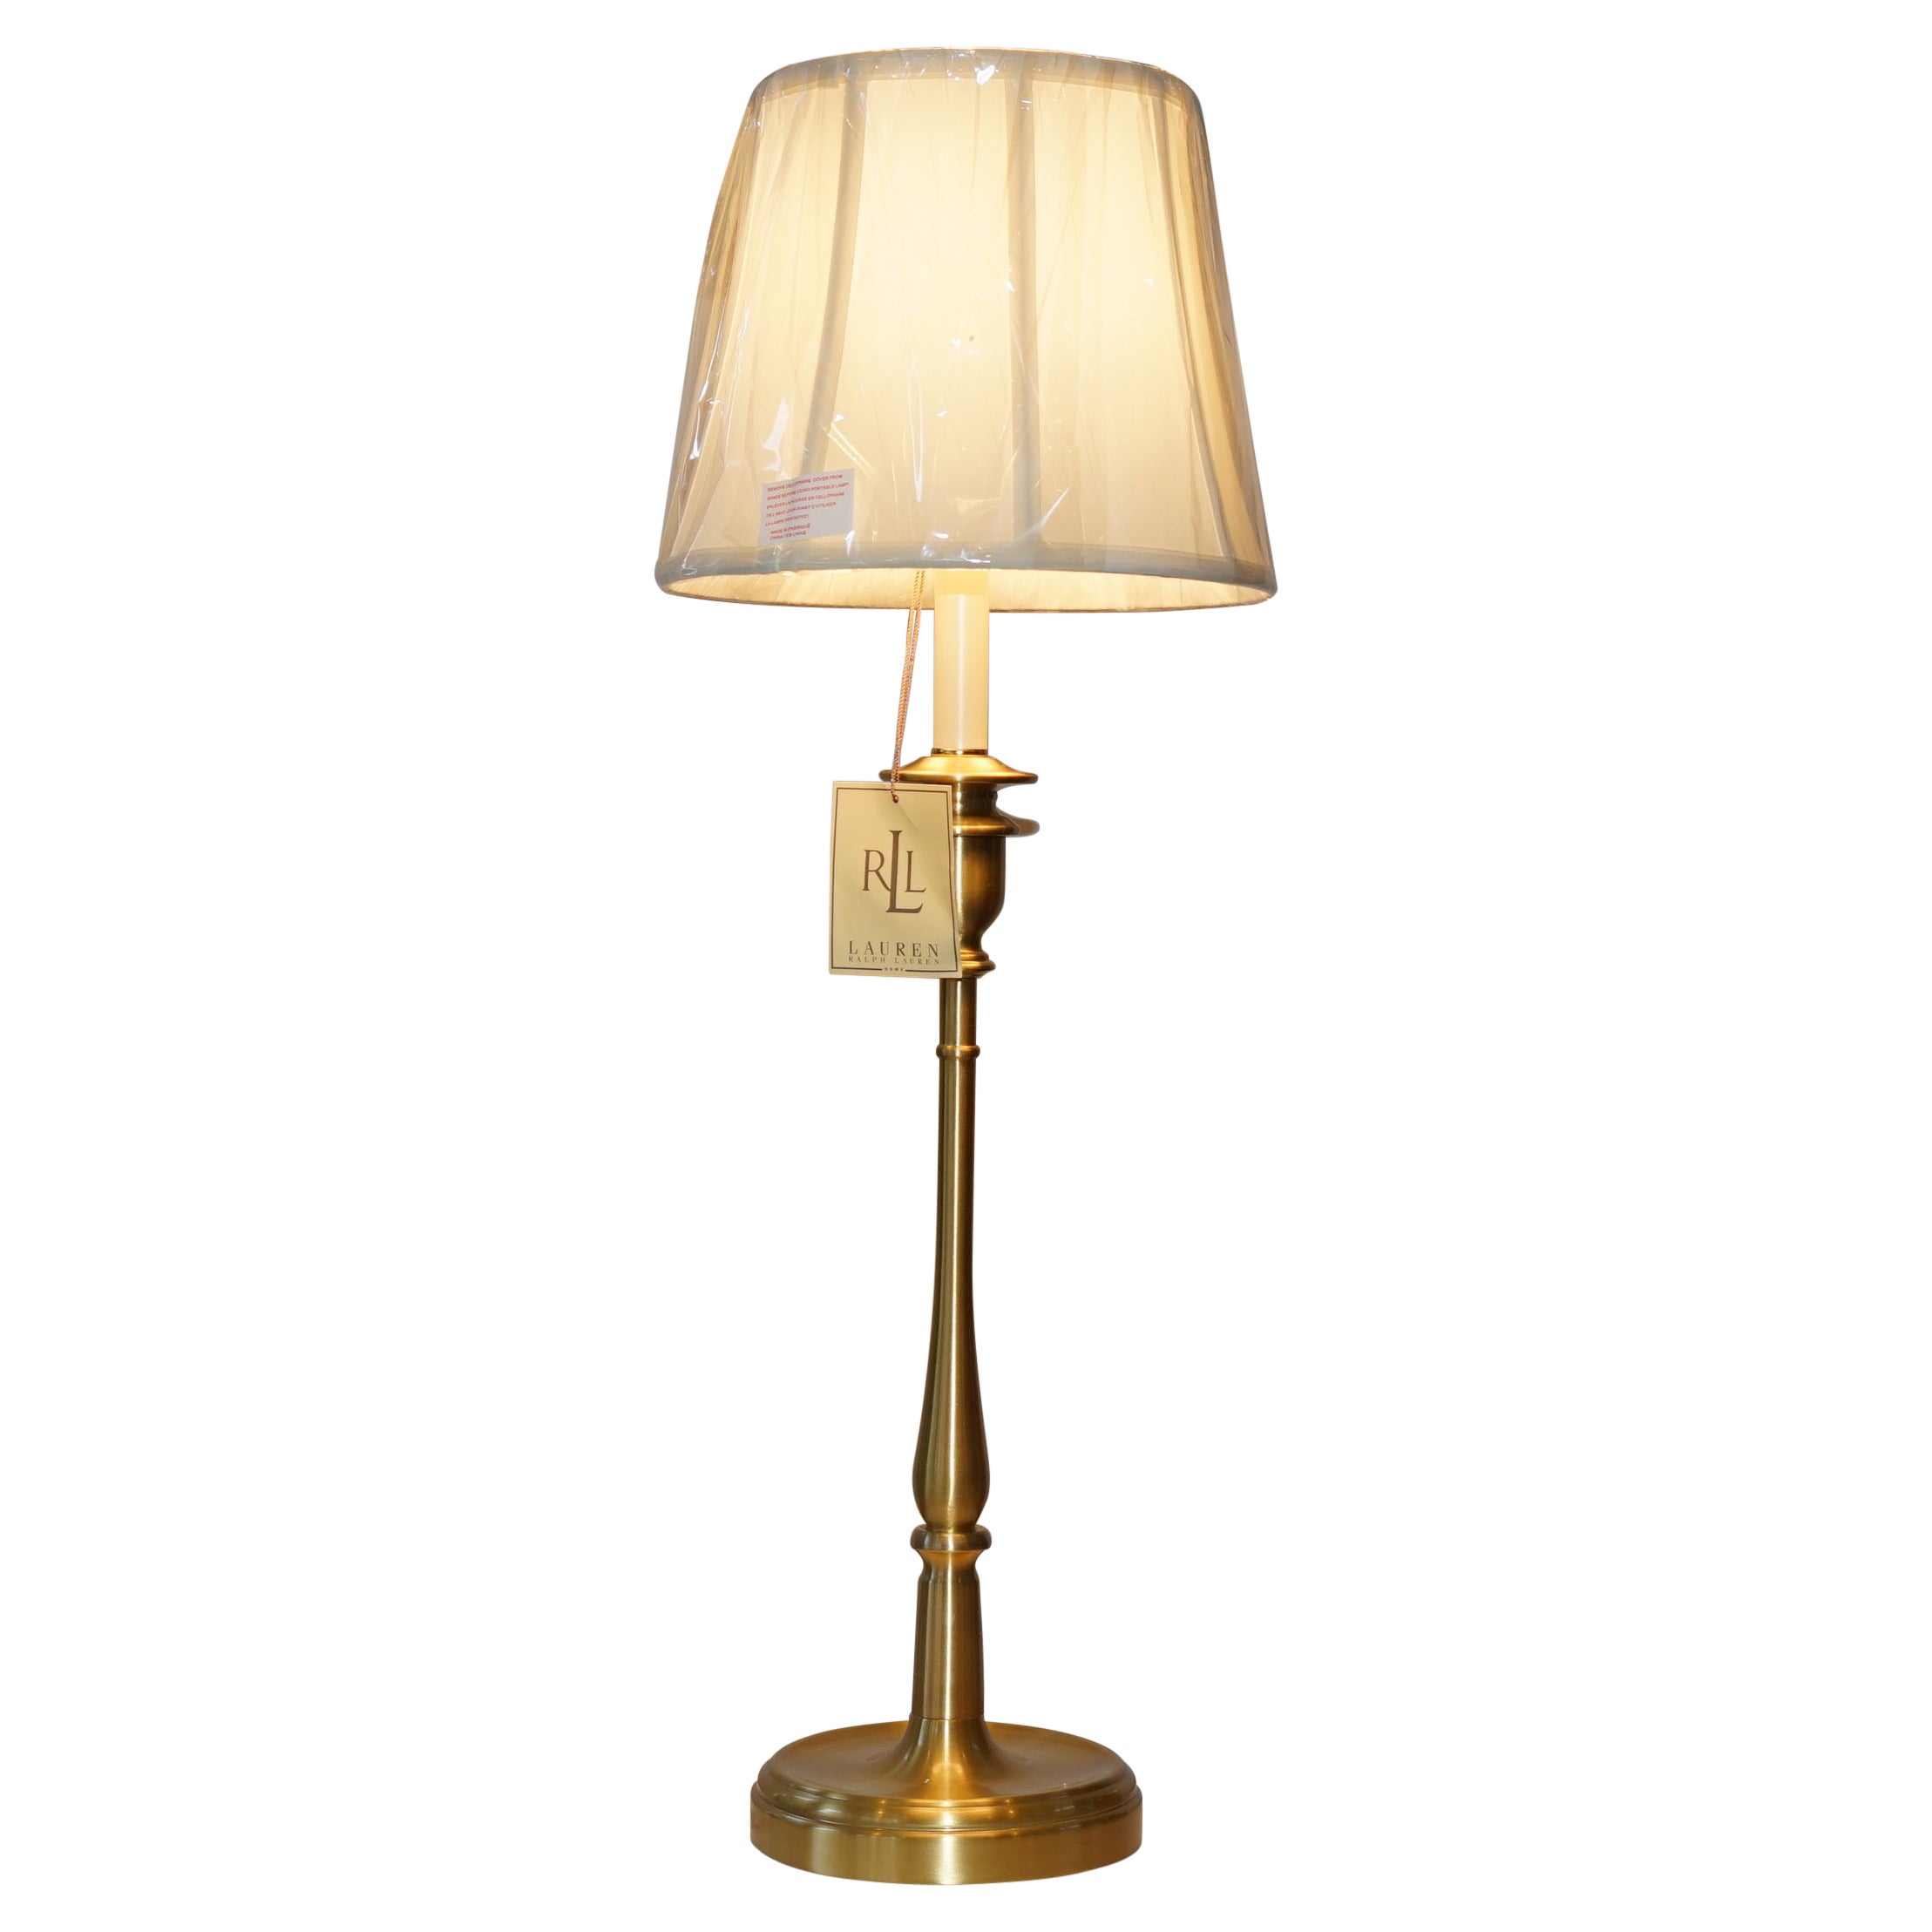 Ralph Lauren Table Lamps - 15 For Sale at 1stDibs | ralph lauren table lamps  at homegoods, ralph lauren ceramic table lamps, ralph lauren desk lamp